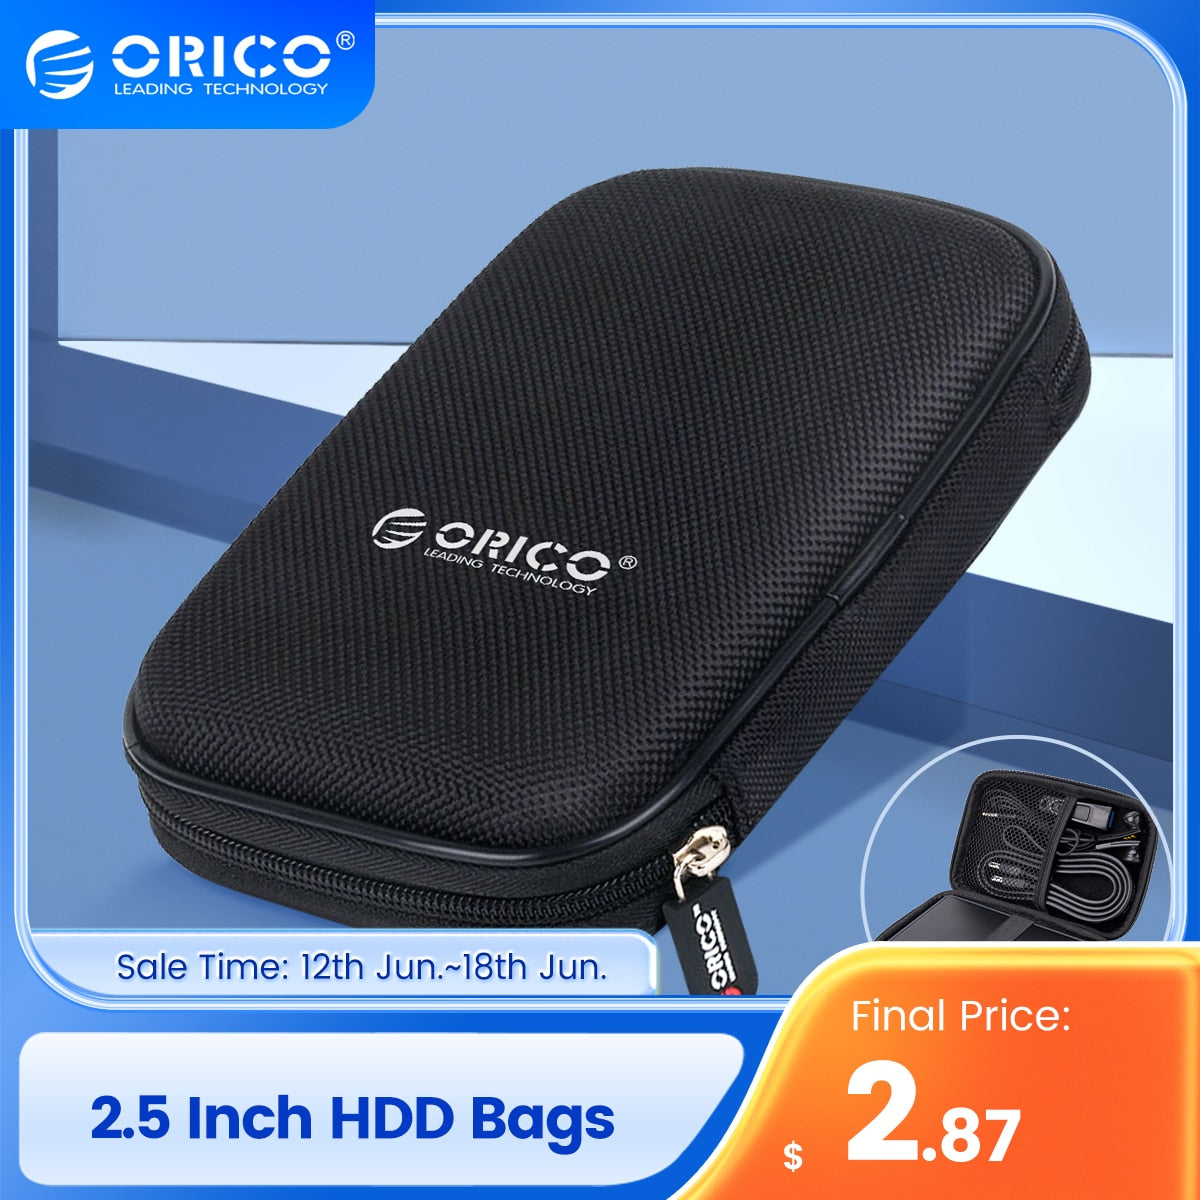 ORICO 2.5 Inch HDD Box Bag Case Portable Hard Drive Bag for External Portable HDD hdd box case storage Protection Black/Red/Blue